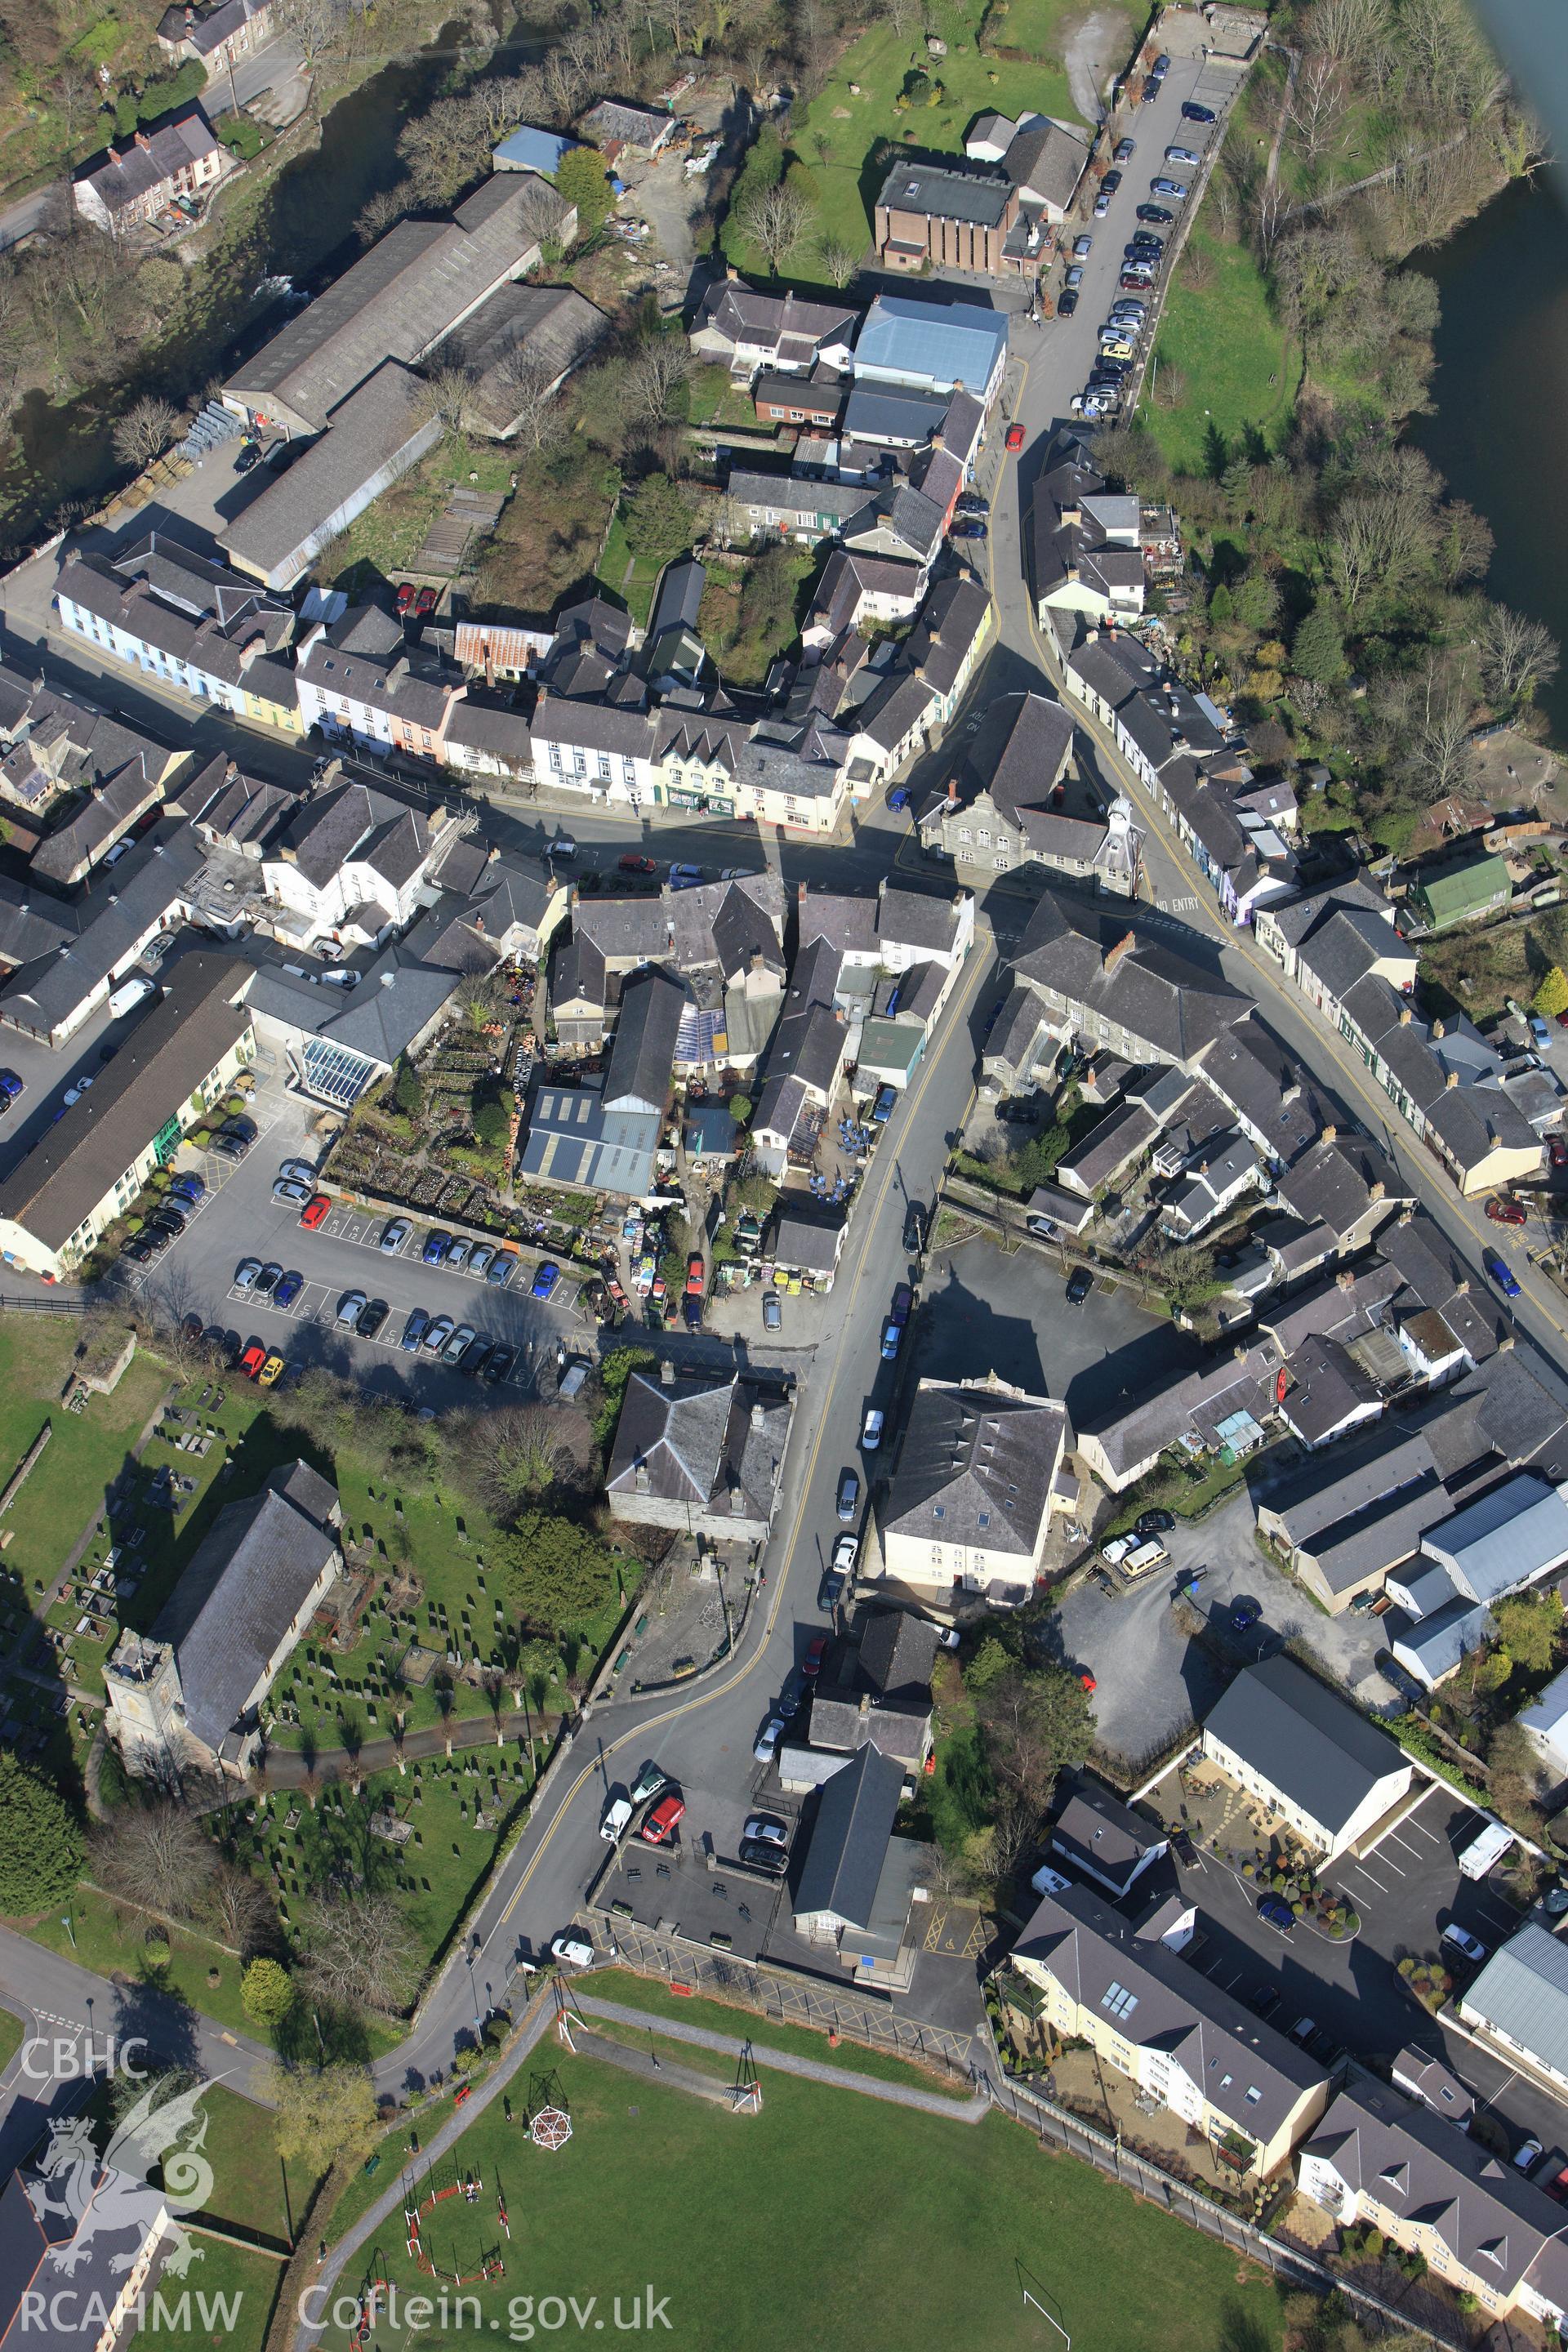 RCAHMW colour oblique aerial photograph of Newcastle Emlyn. Taken on 13 April 2010 by Toby Driver